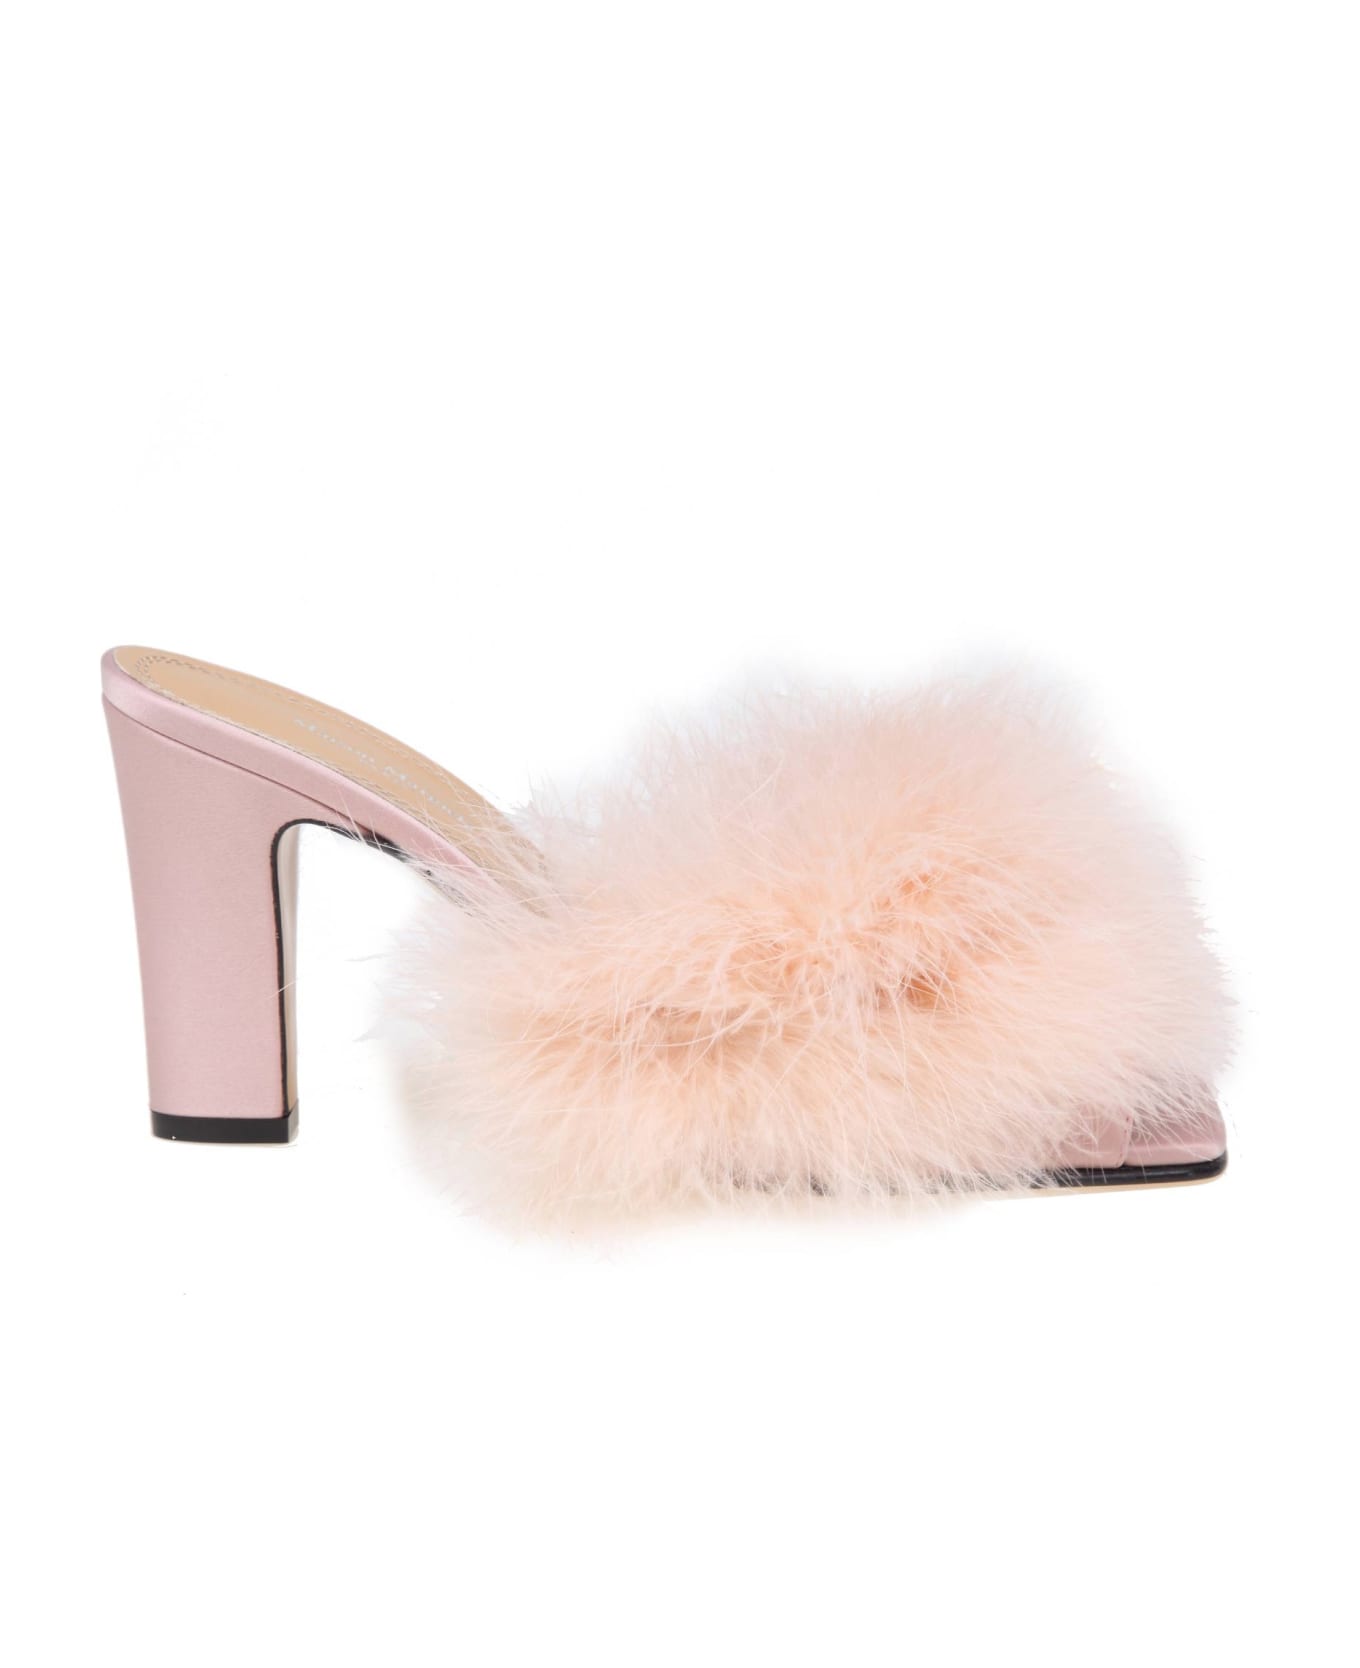 Maison Margiela Mules With Feathers - PINK